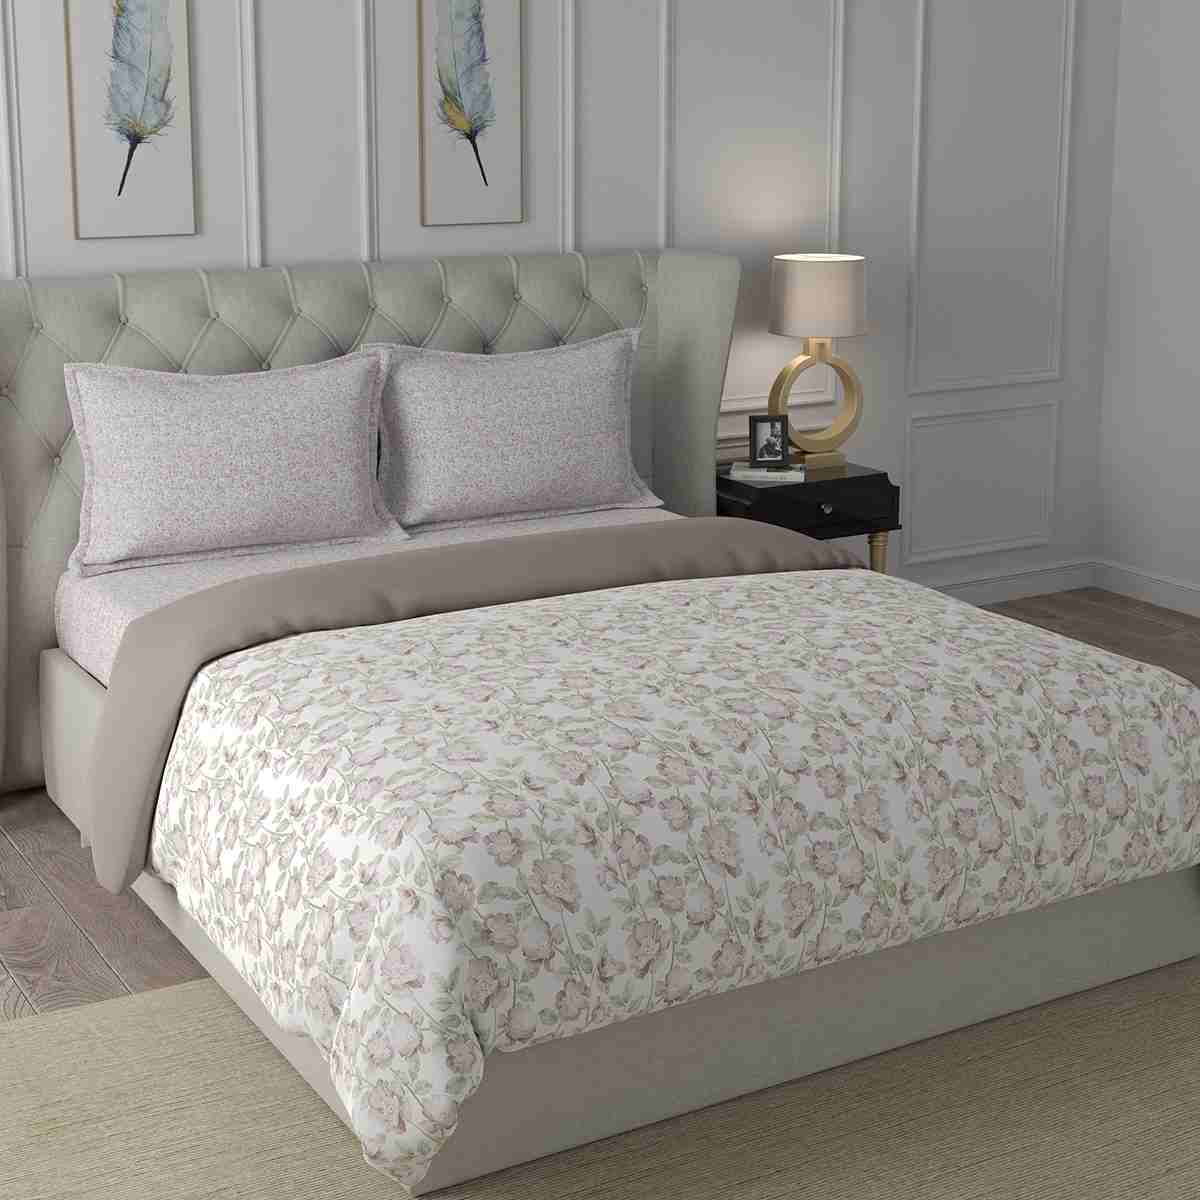 Regency Abigail Summer AC Quilt/Quilted Bed Cover/Comforter Neutral